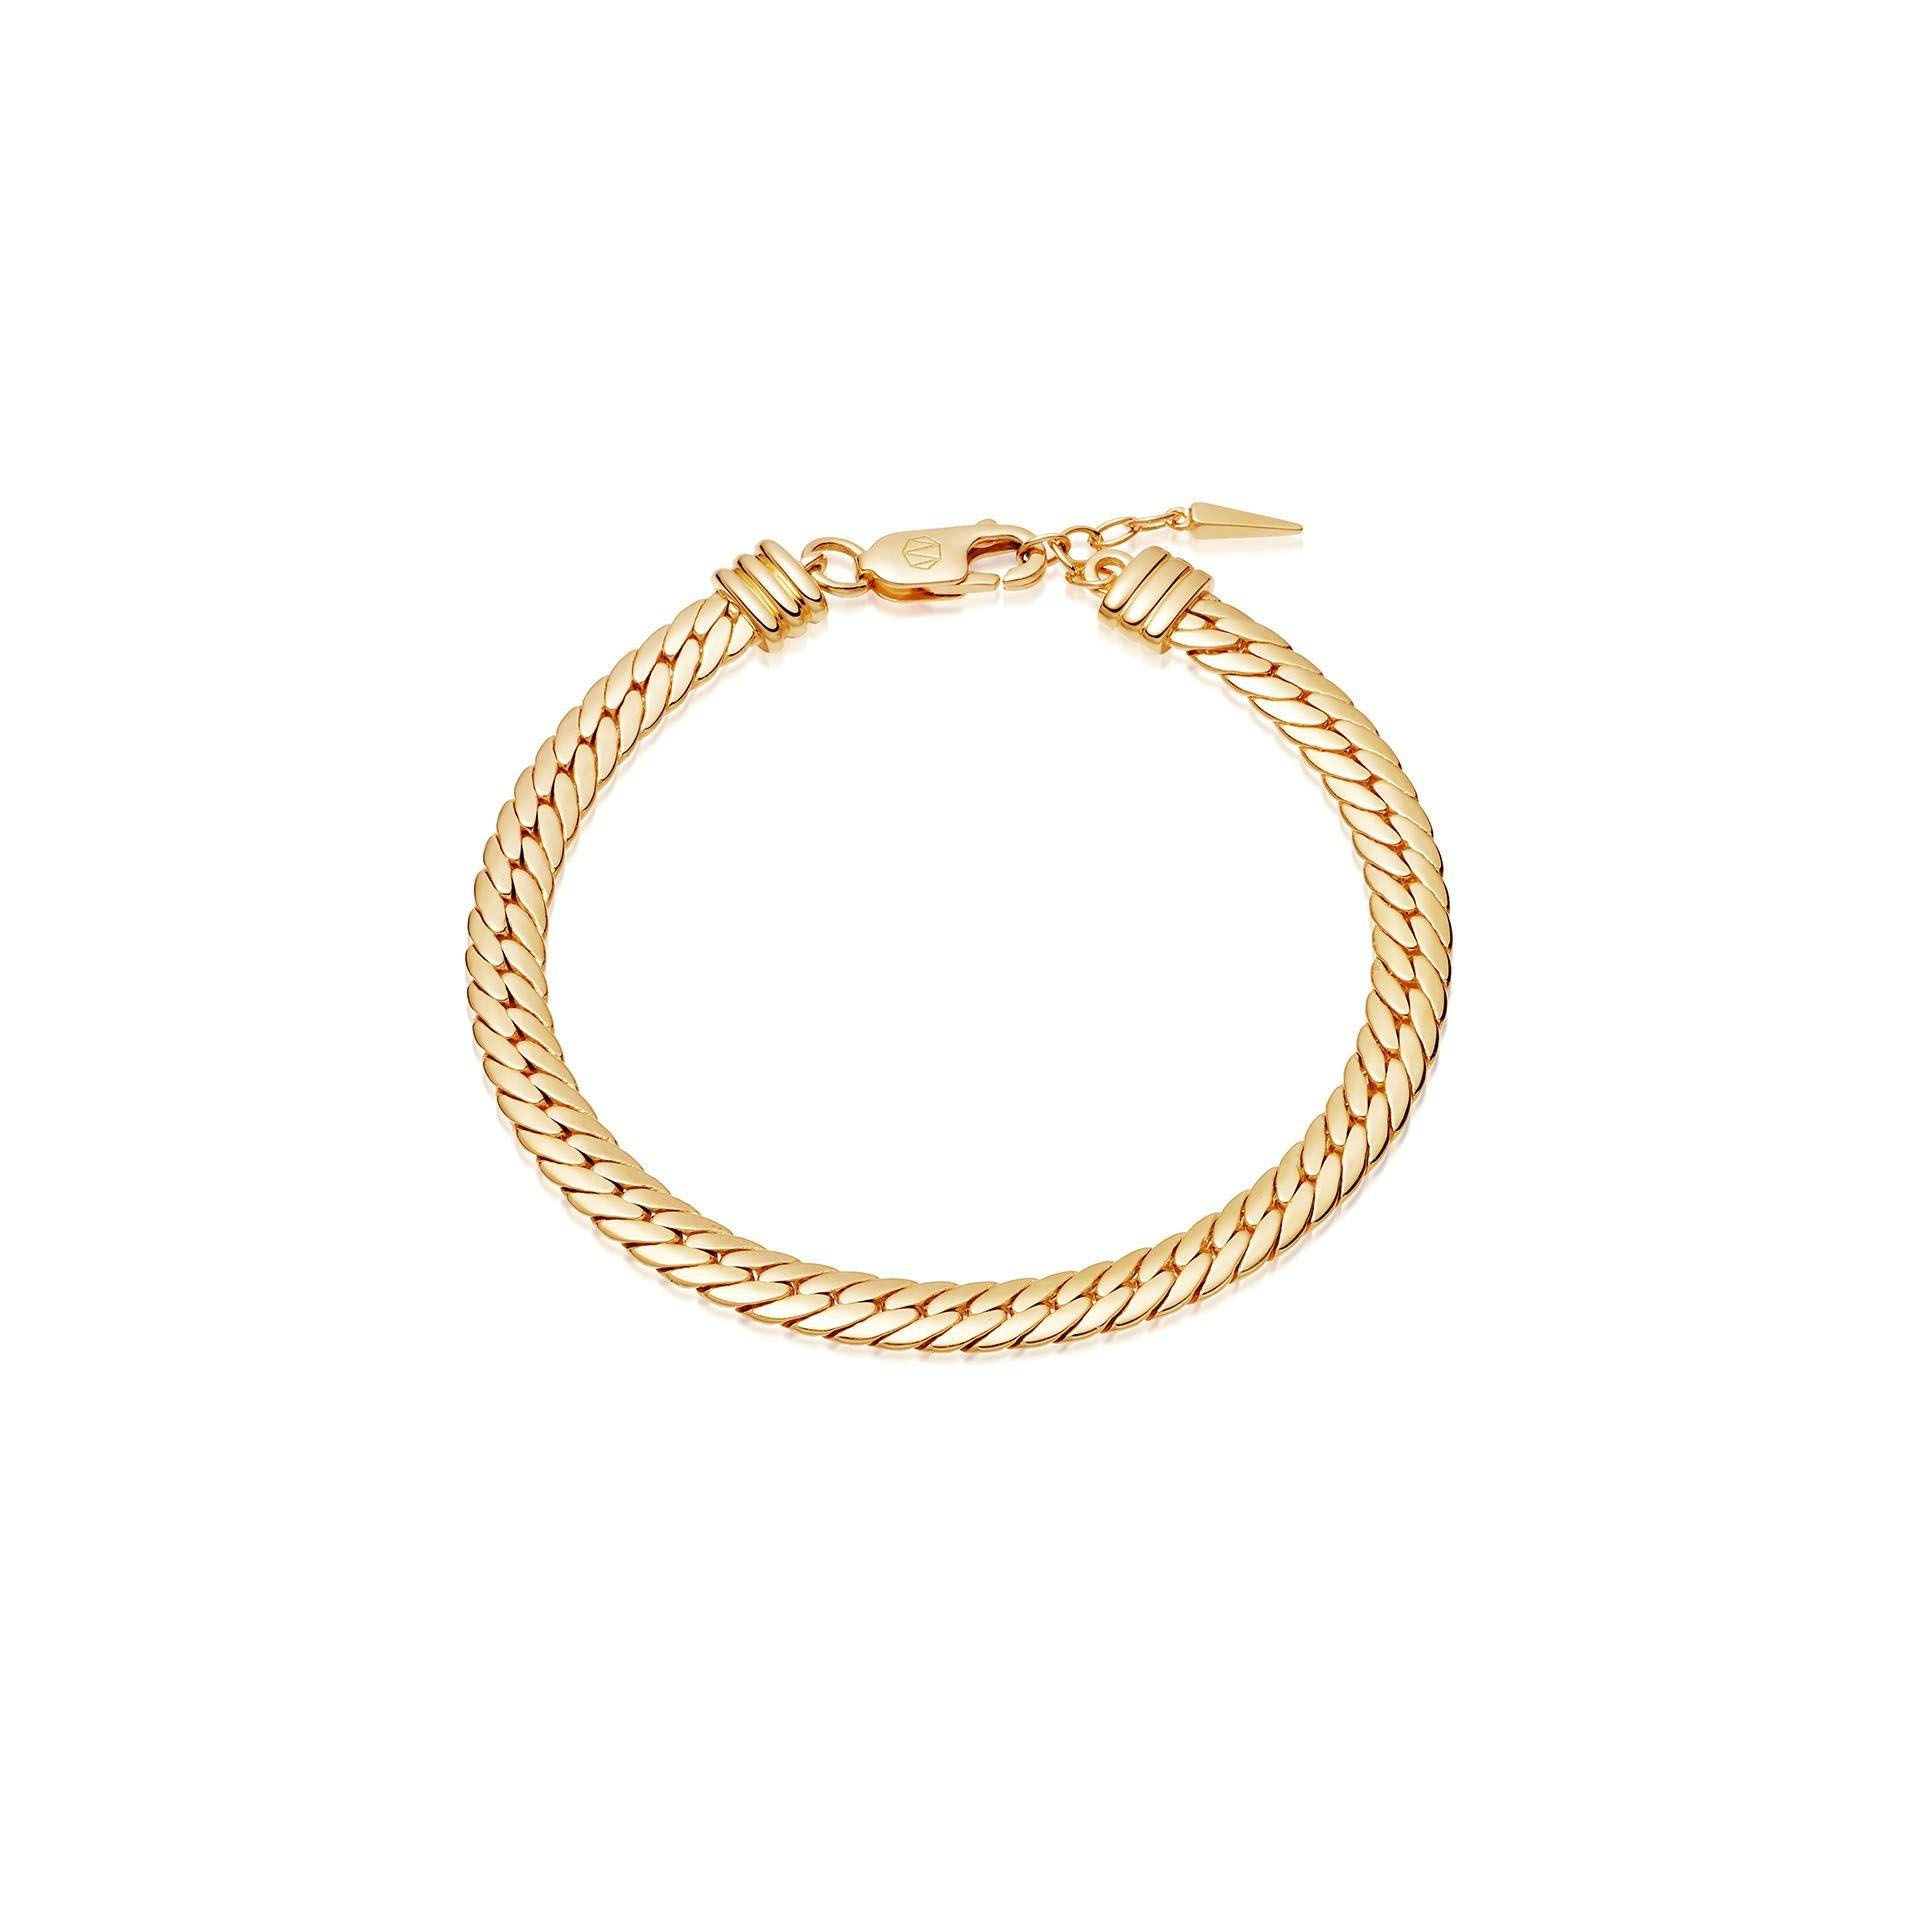 Wholesale offer your ideas and OEM/ODM Jewelry designs oem snake chain bracelet in 18ct Gold Plated on Brass or silver